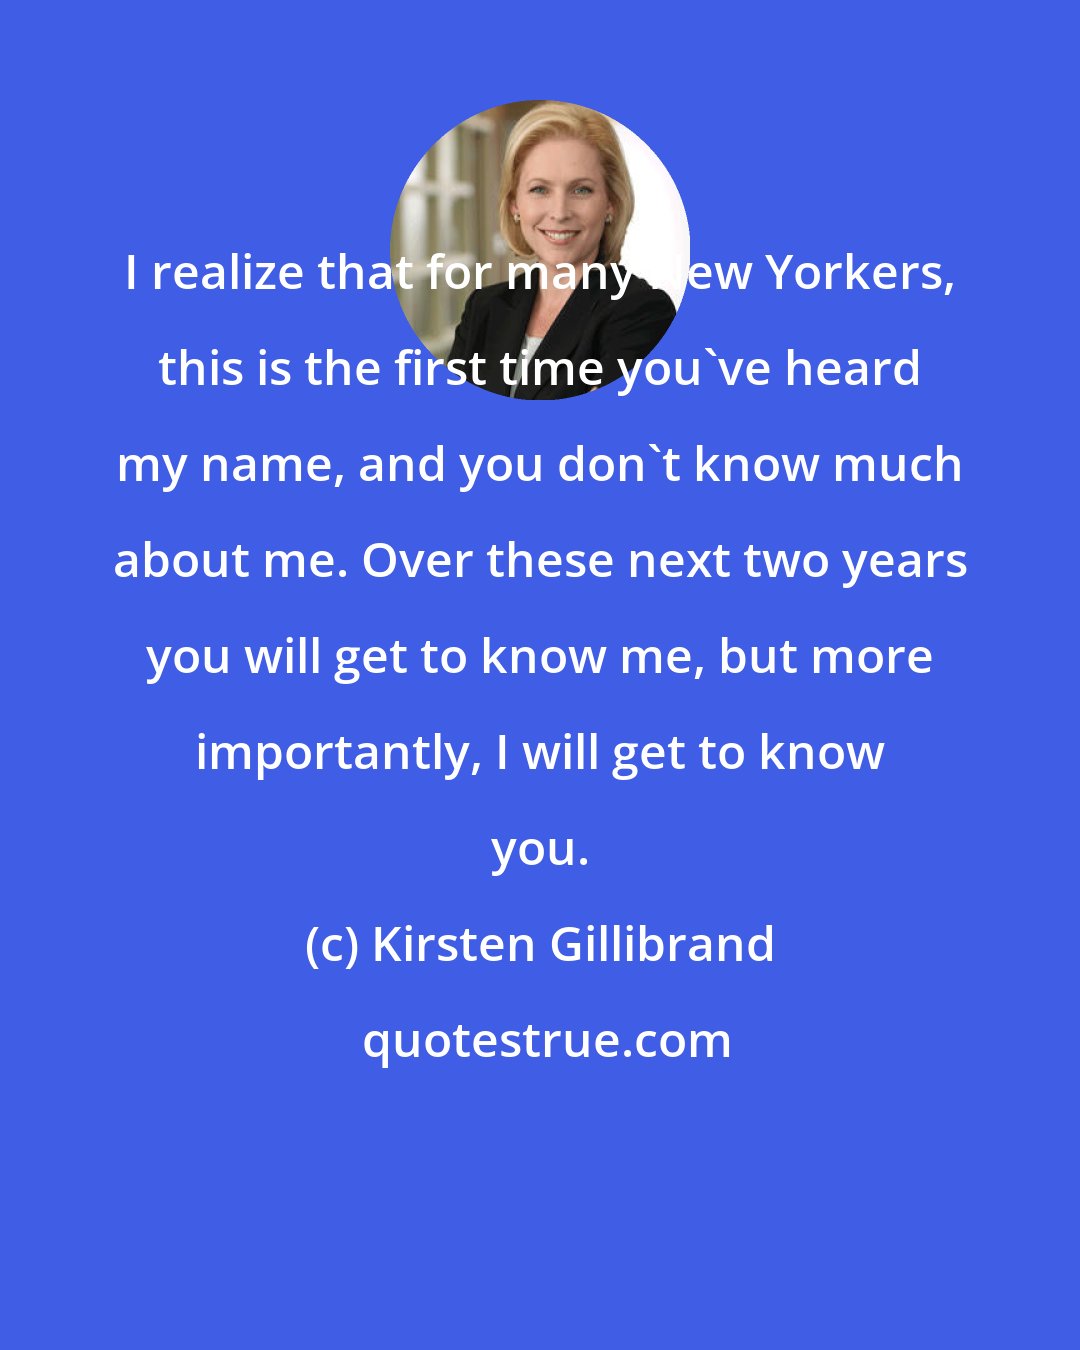 Kirsten Gillibrand: I realize that for many New Yorkers, this is the first time you've heard my name, and you don't know much about me. Over these next two years you will get to know me, but more importantly, I will get to know you.